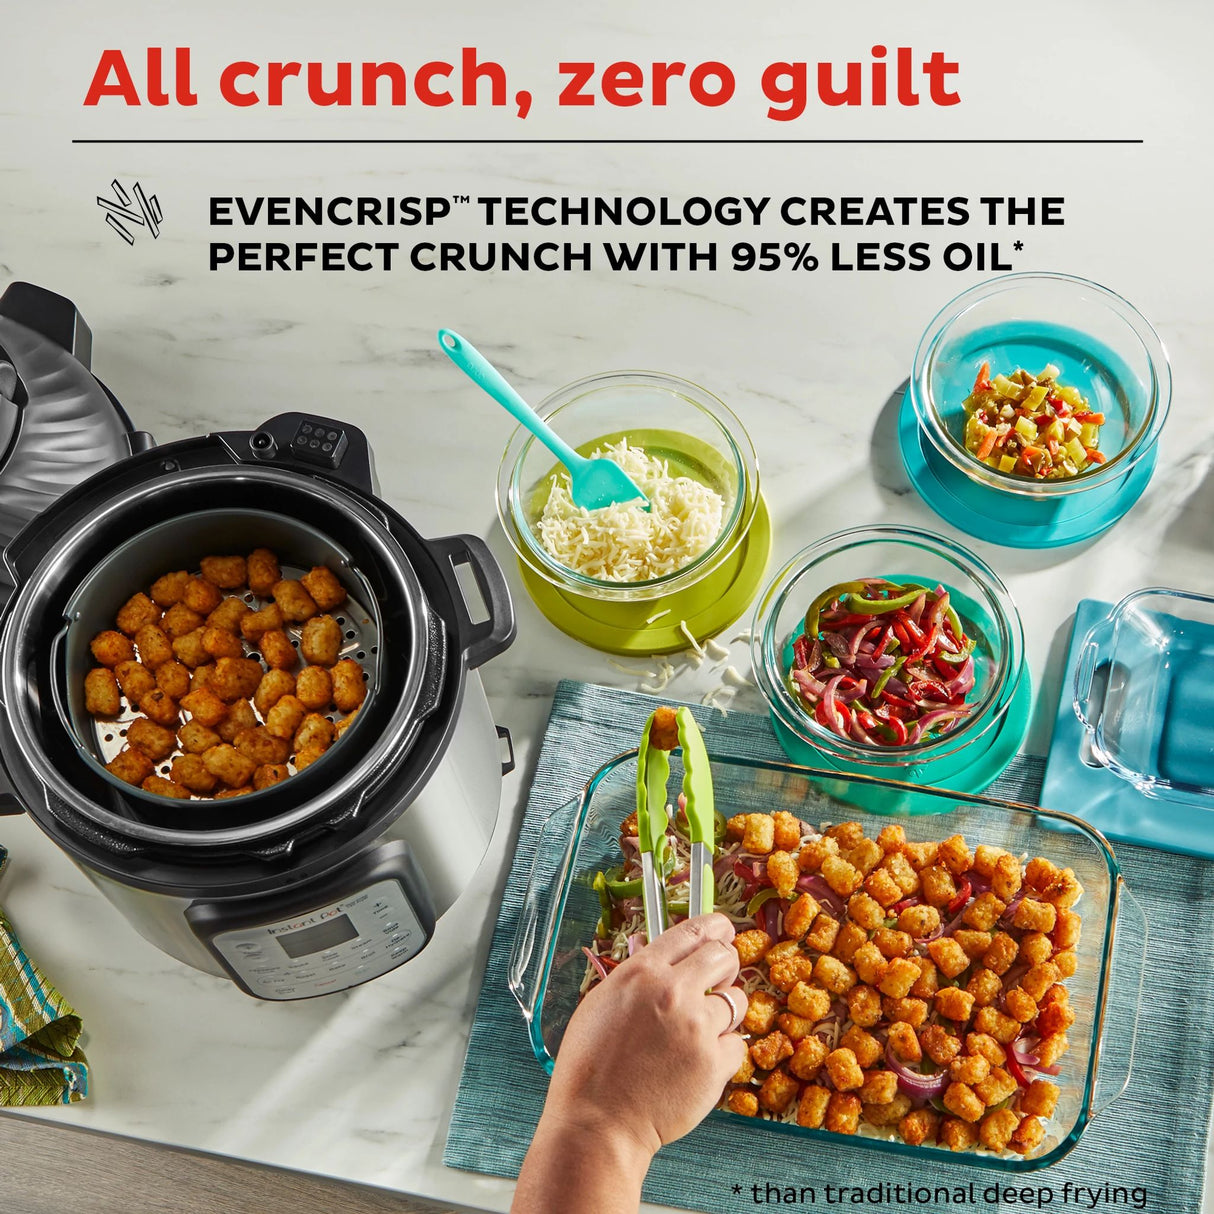  Instant Pot Duo Crisp and Air Fryer 6-quart Multi-Use Pressure Cooker with text All crunch, zero guilt